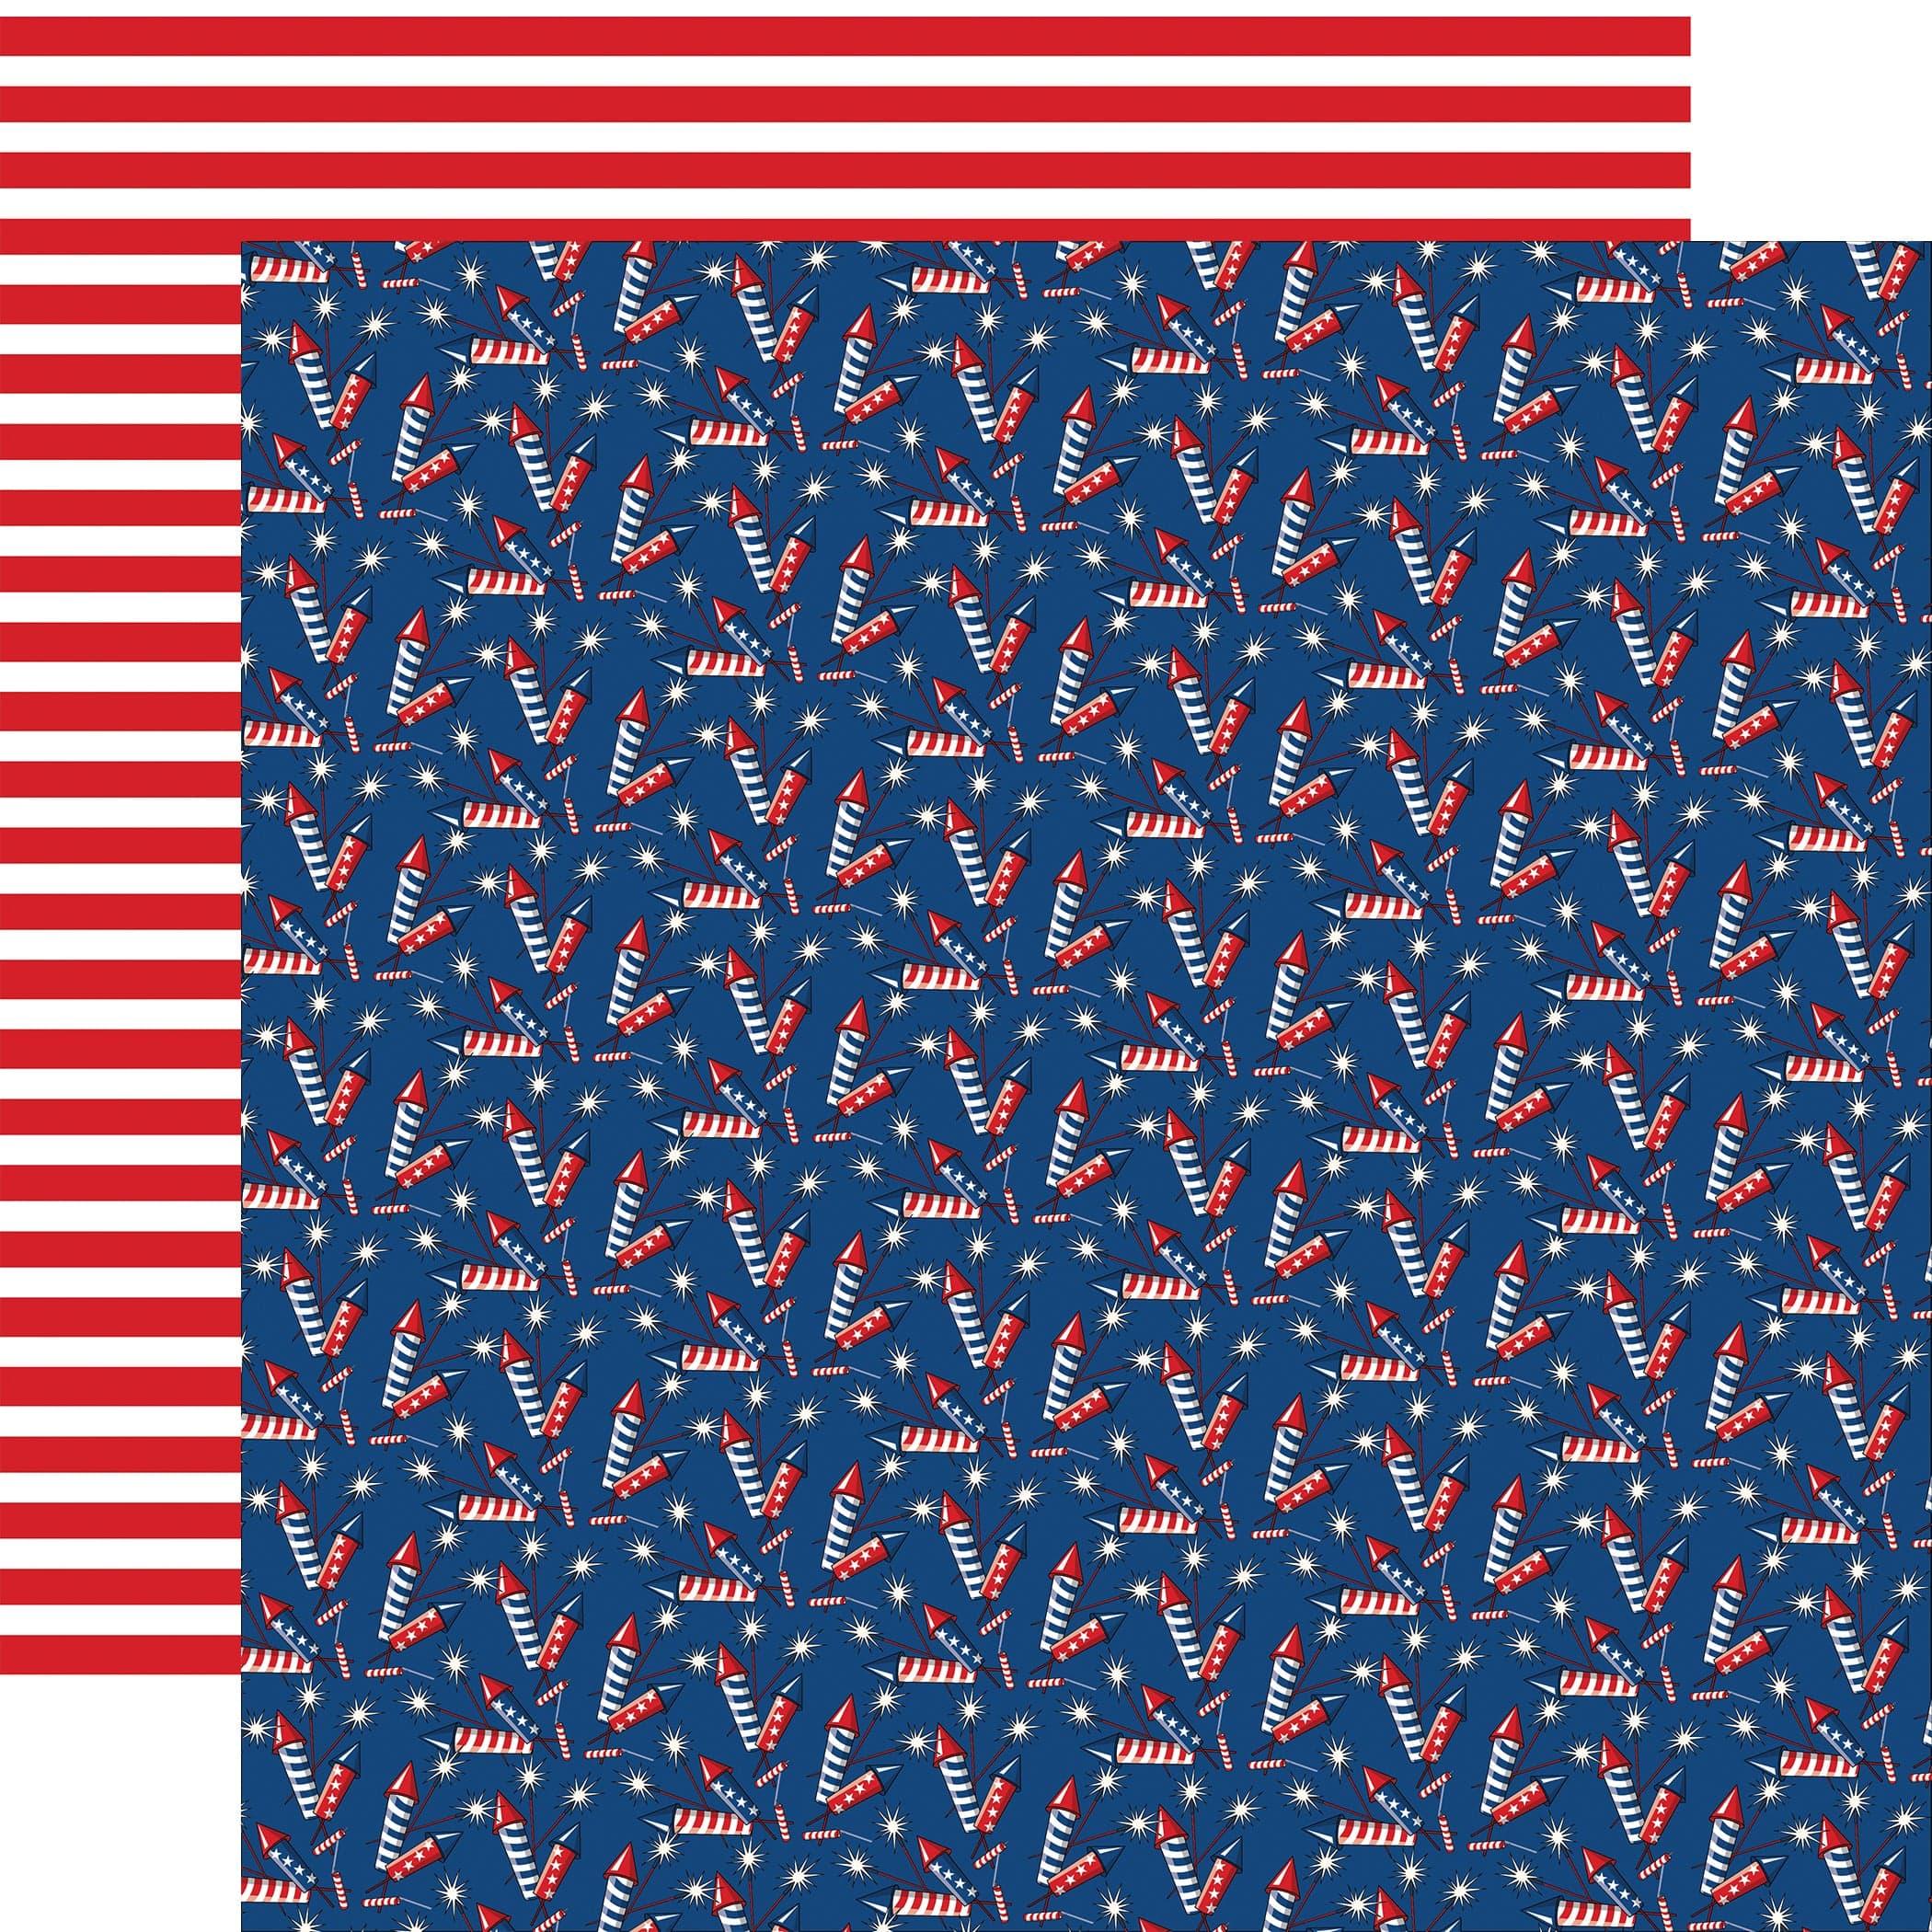 God Bless America Collection Firecracker Fun 12 x 12 Double-Sided Scrapbook Paper by Carta Bella - Scrapbook Supply Companies